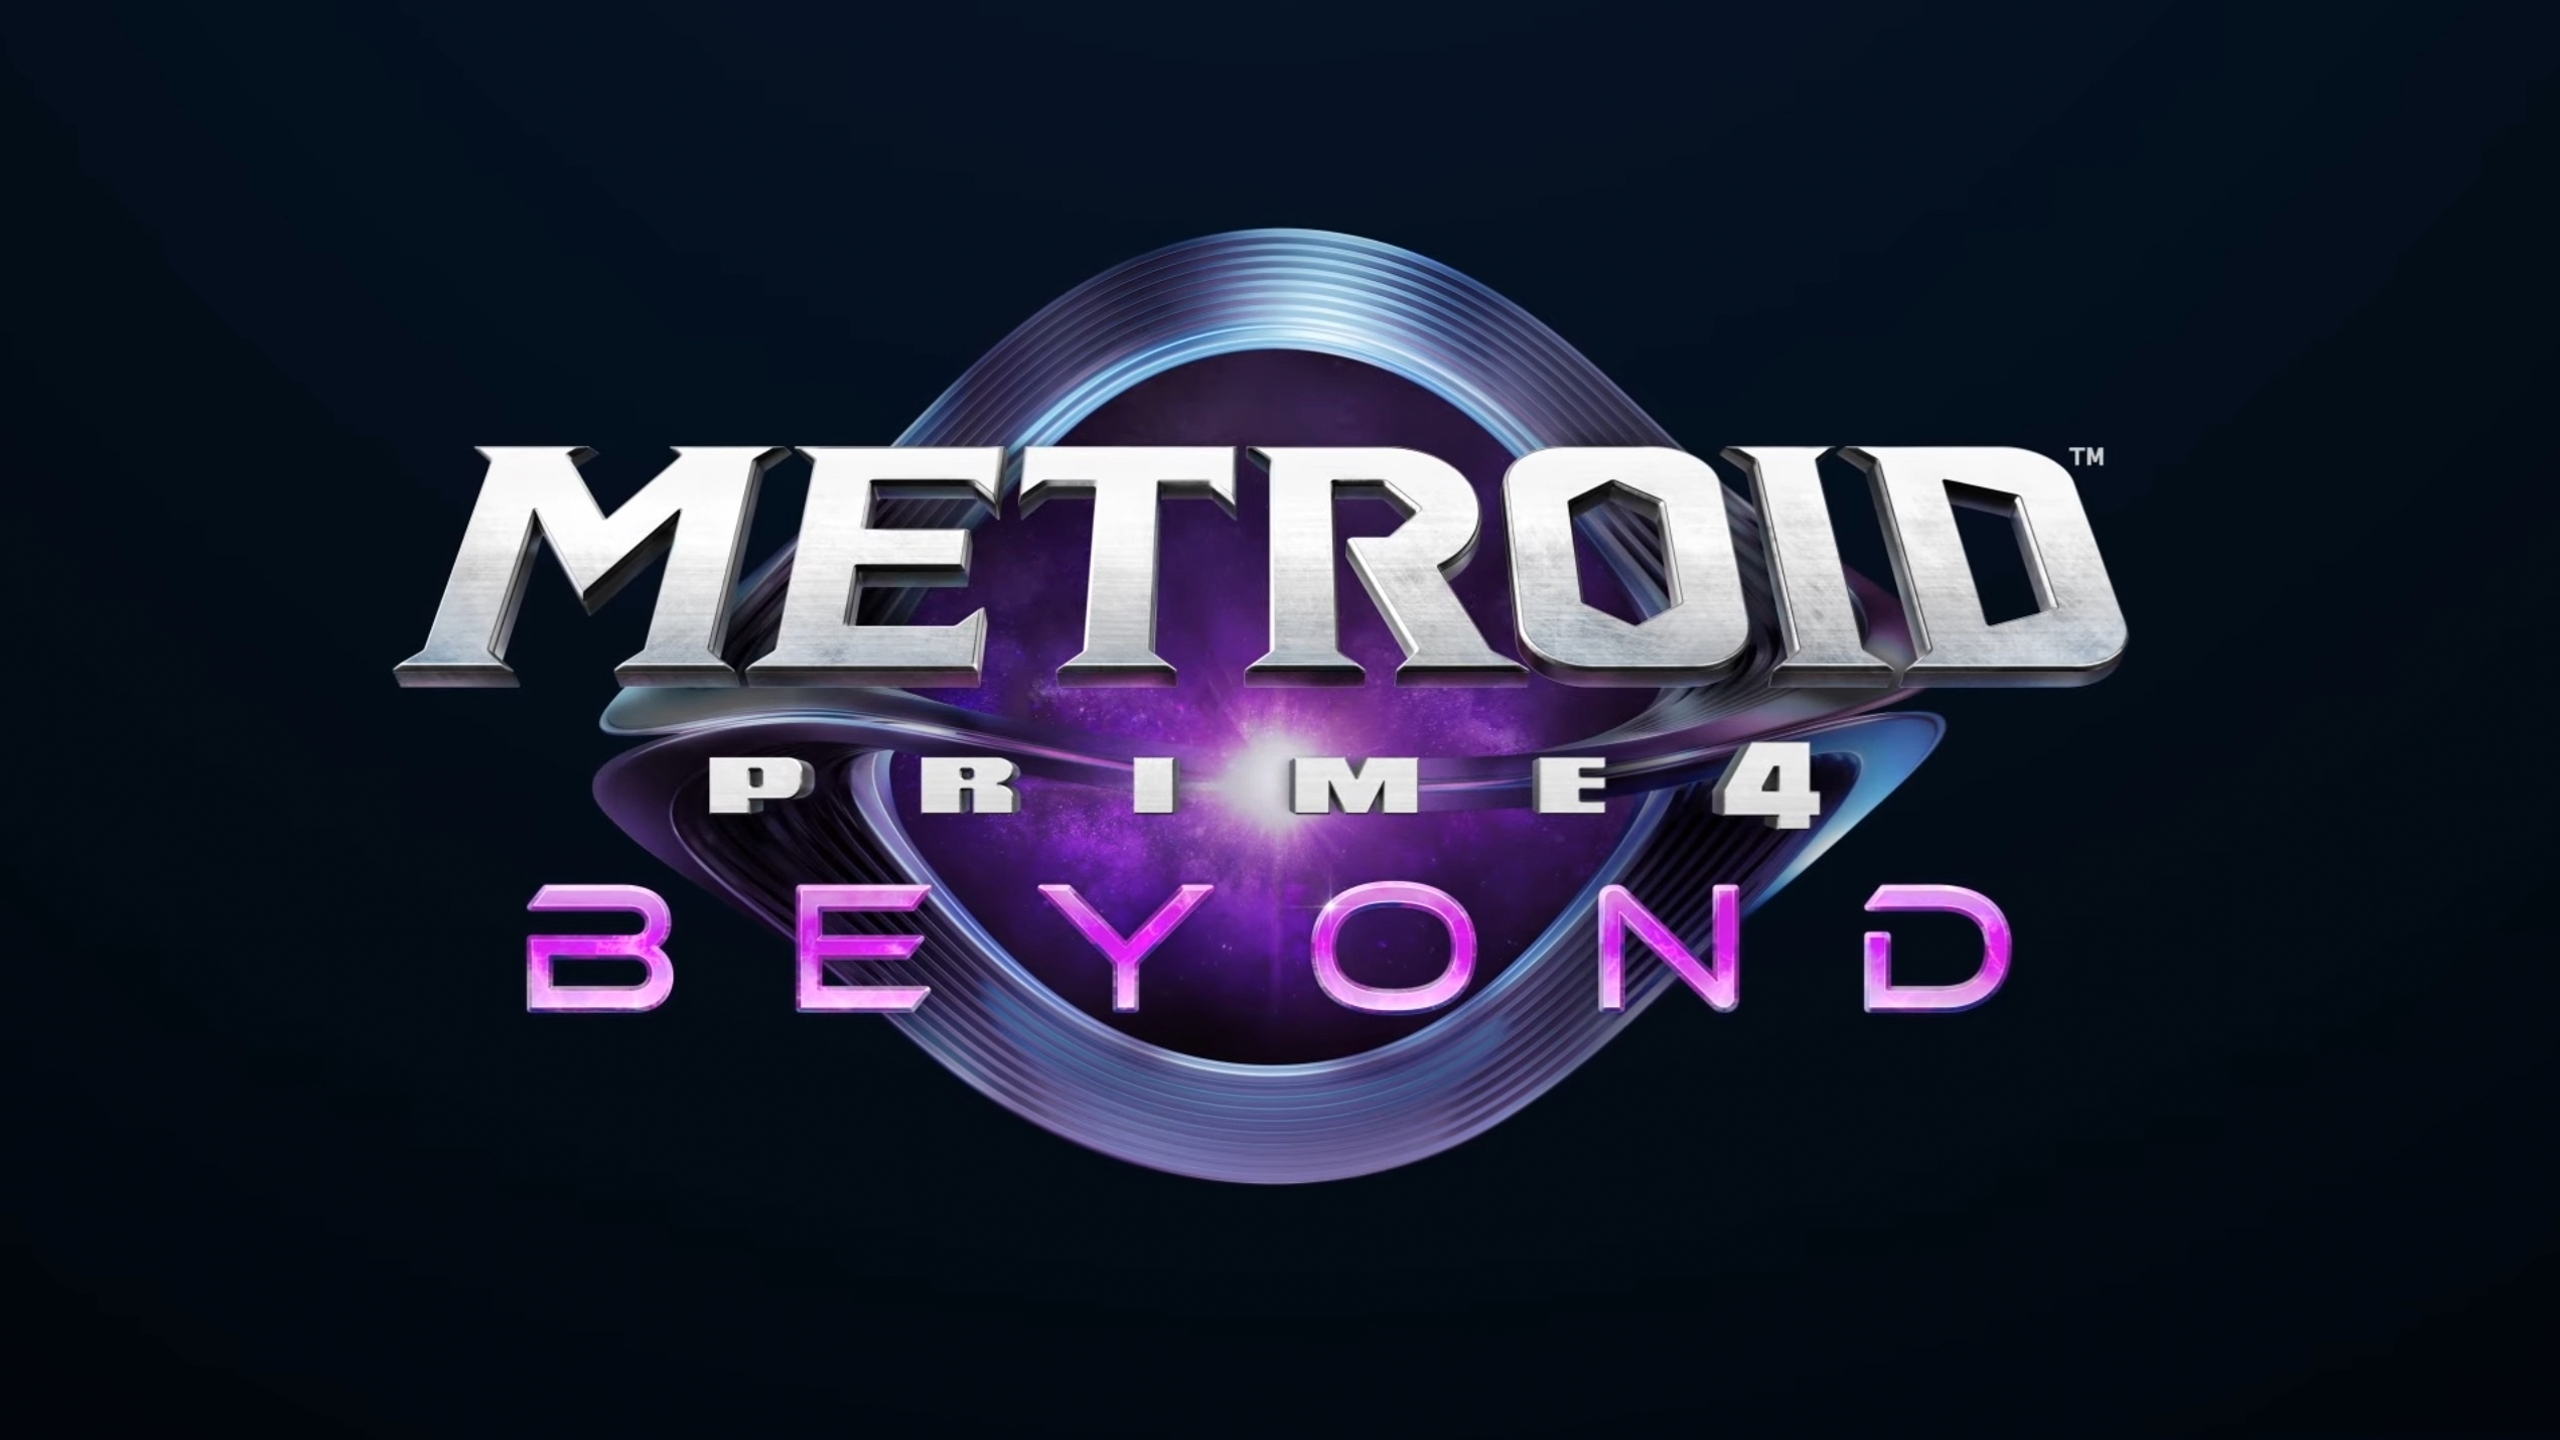 download metroid prime hd switch